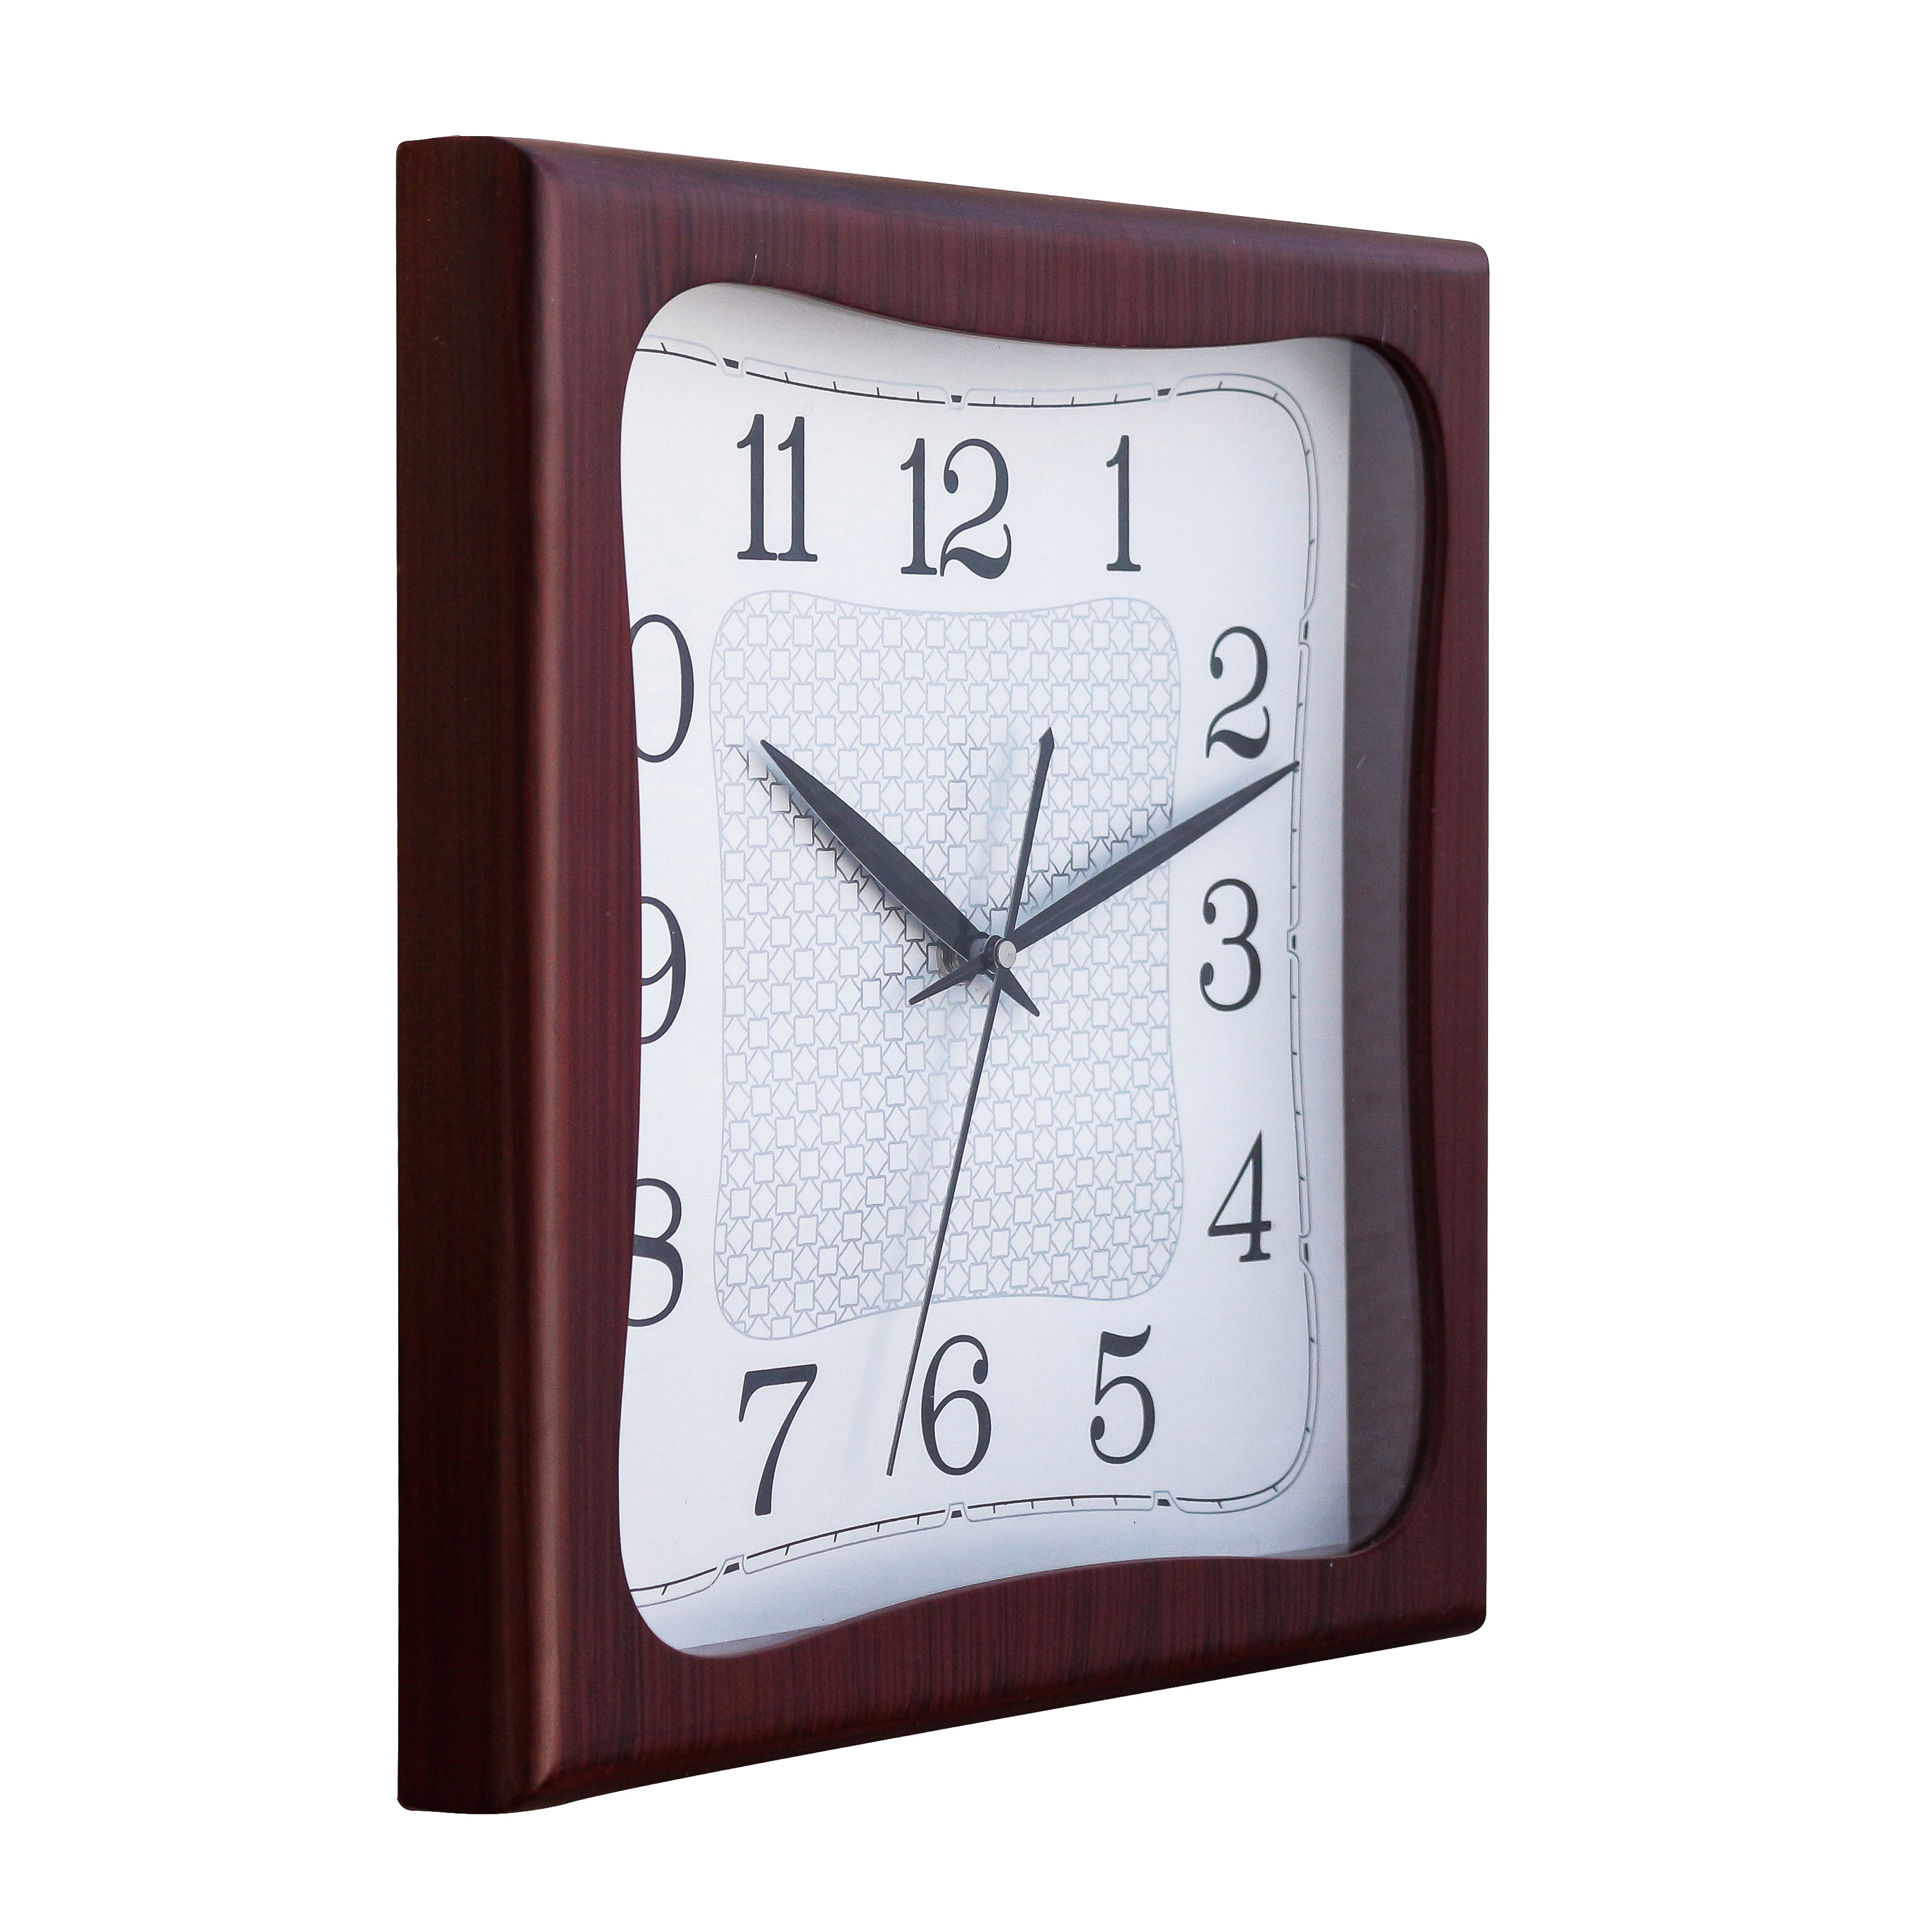 Cola Brown square wooden analog wall clock(28 cm x 28 cm) 3